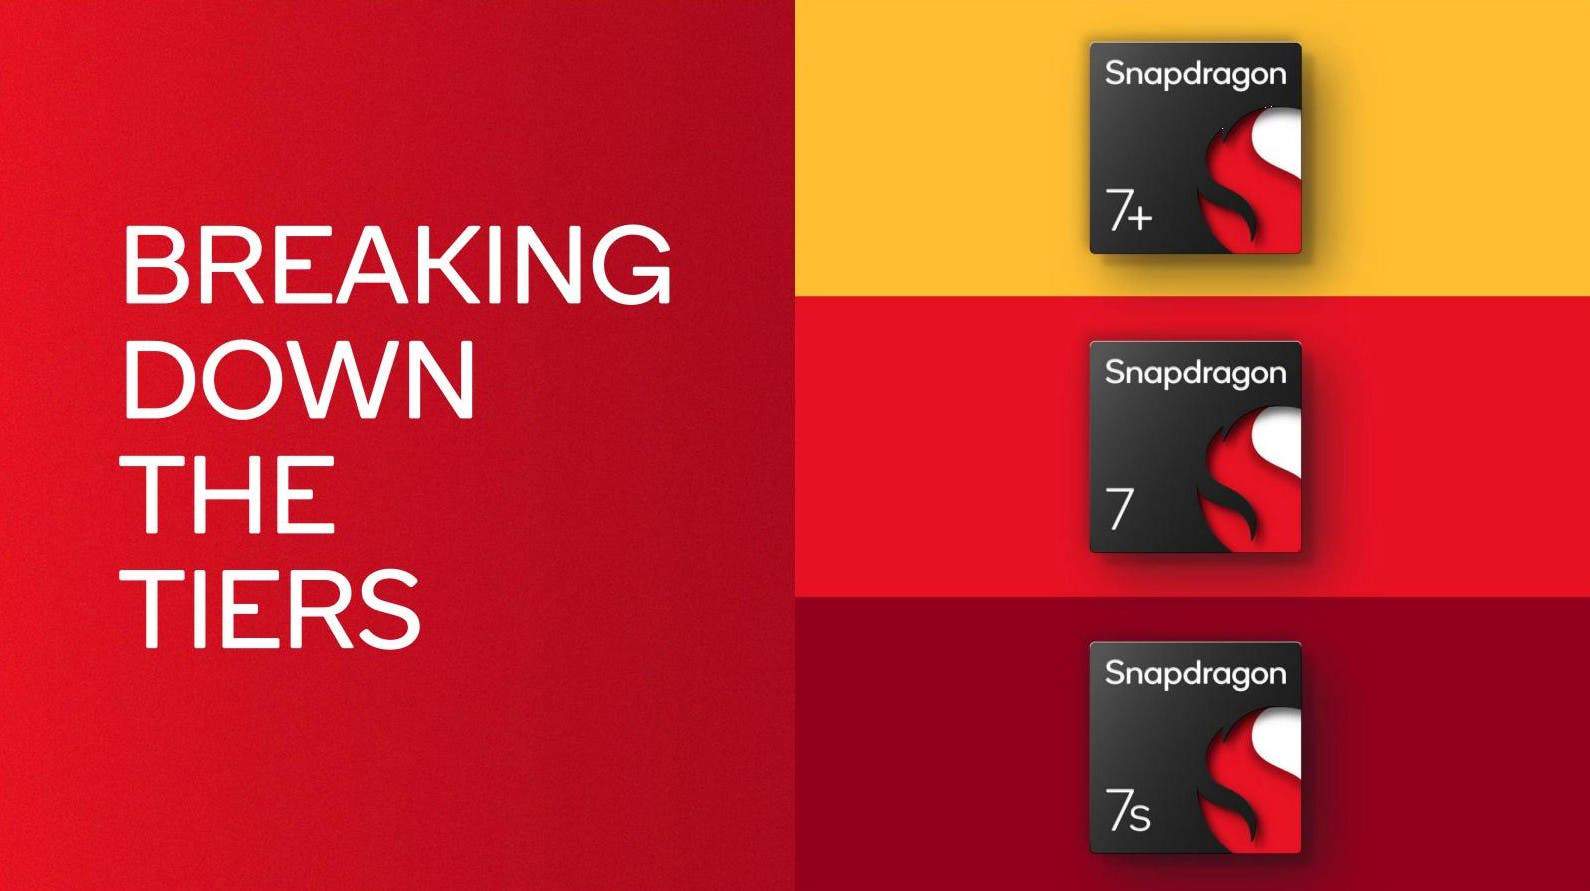 Snapdragon S and Plus tier explained